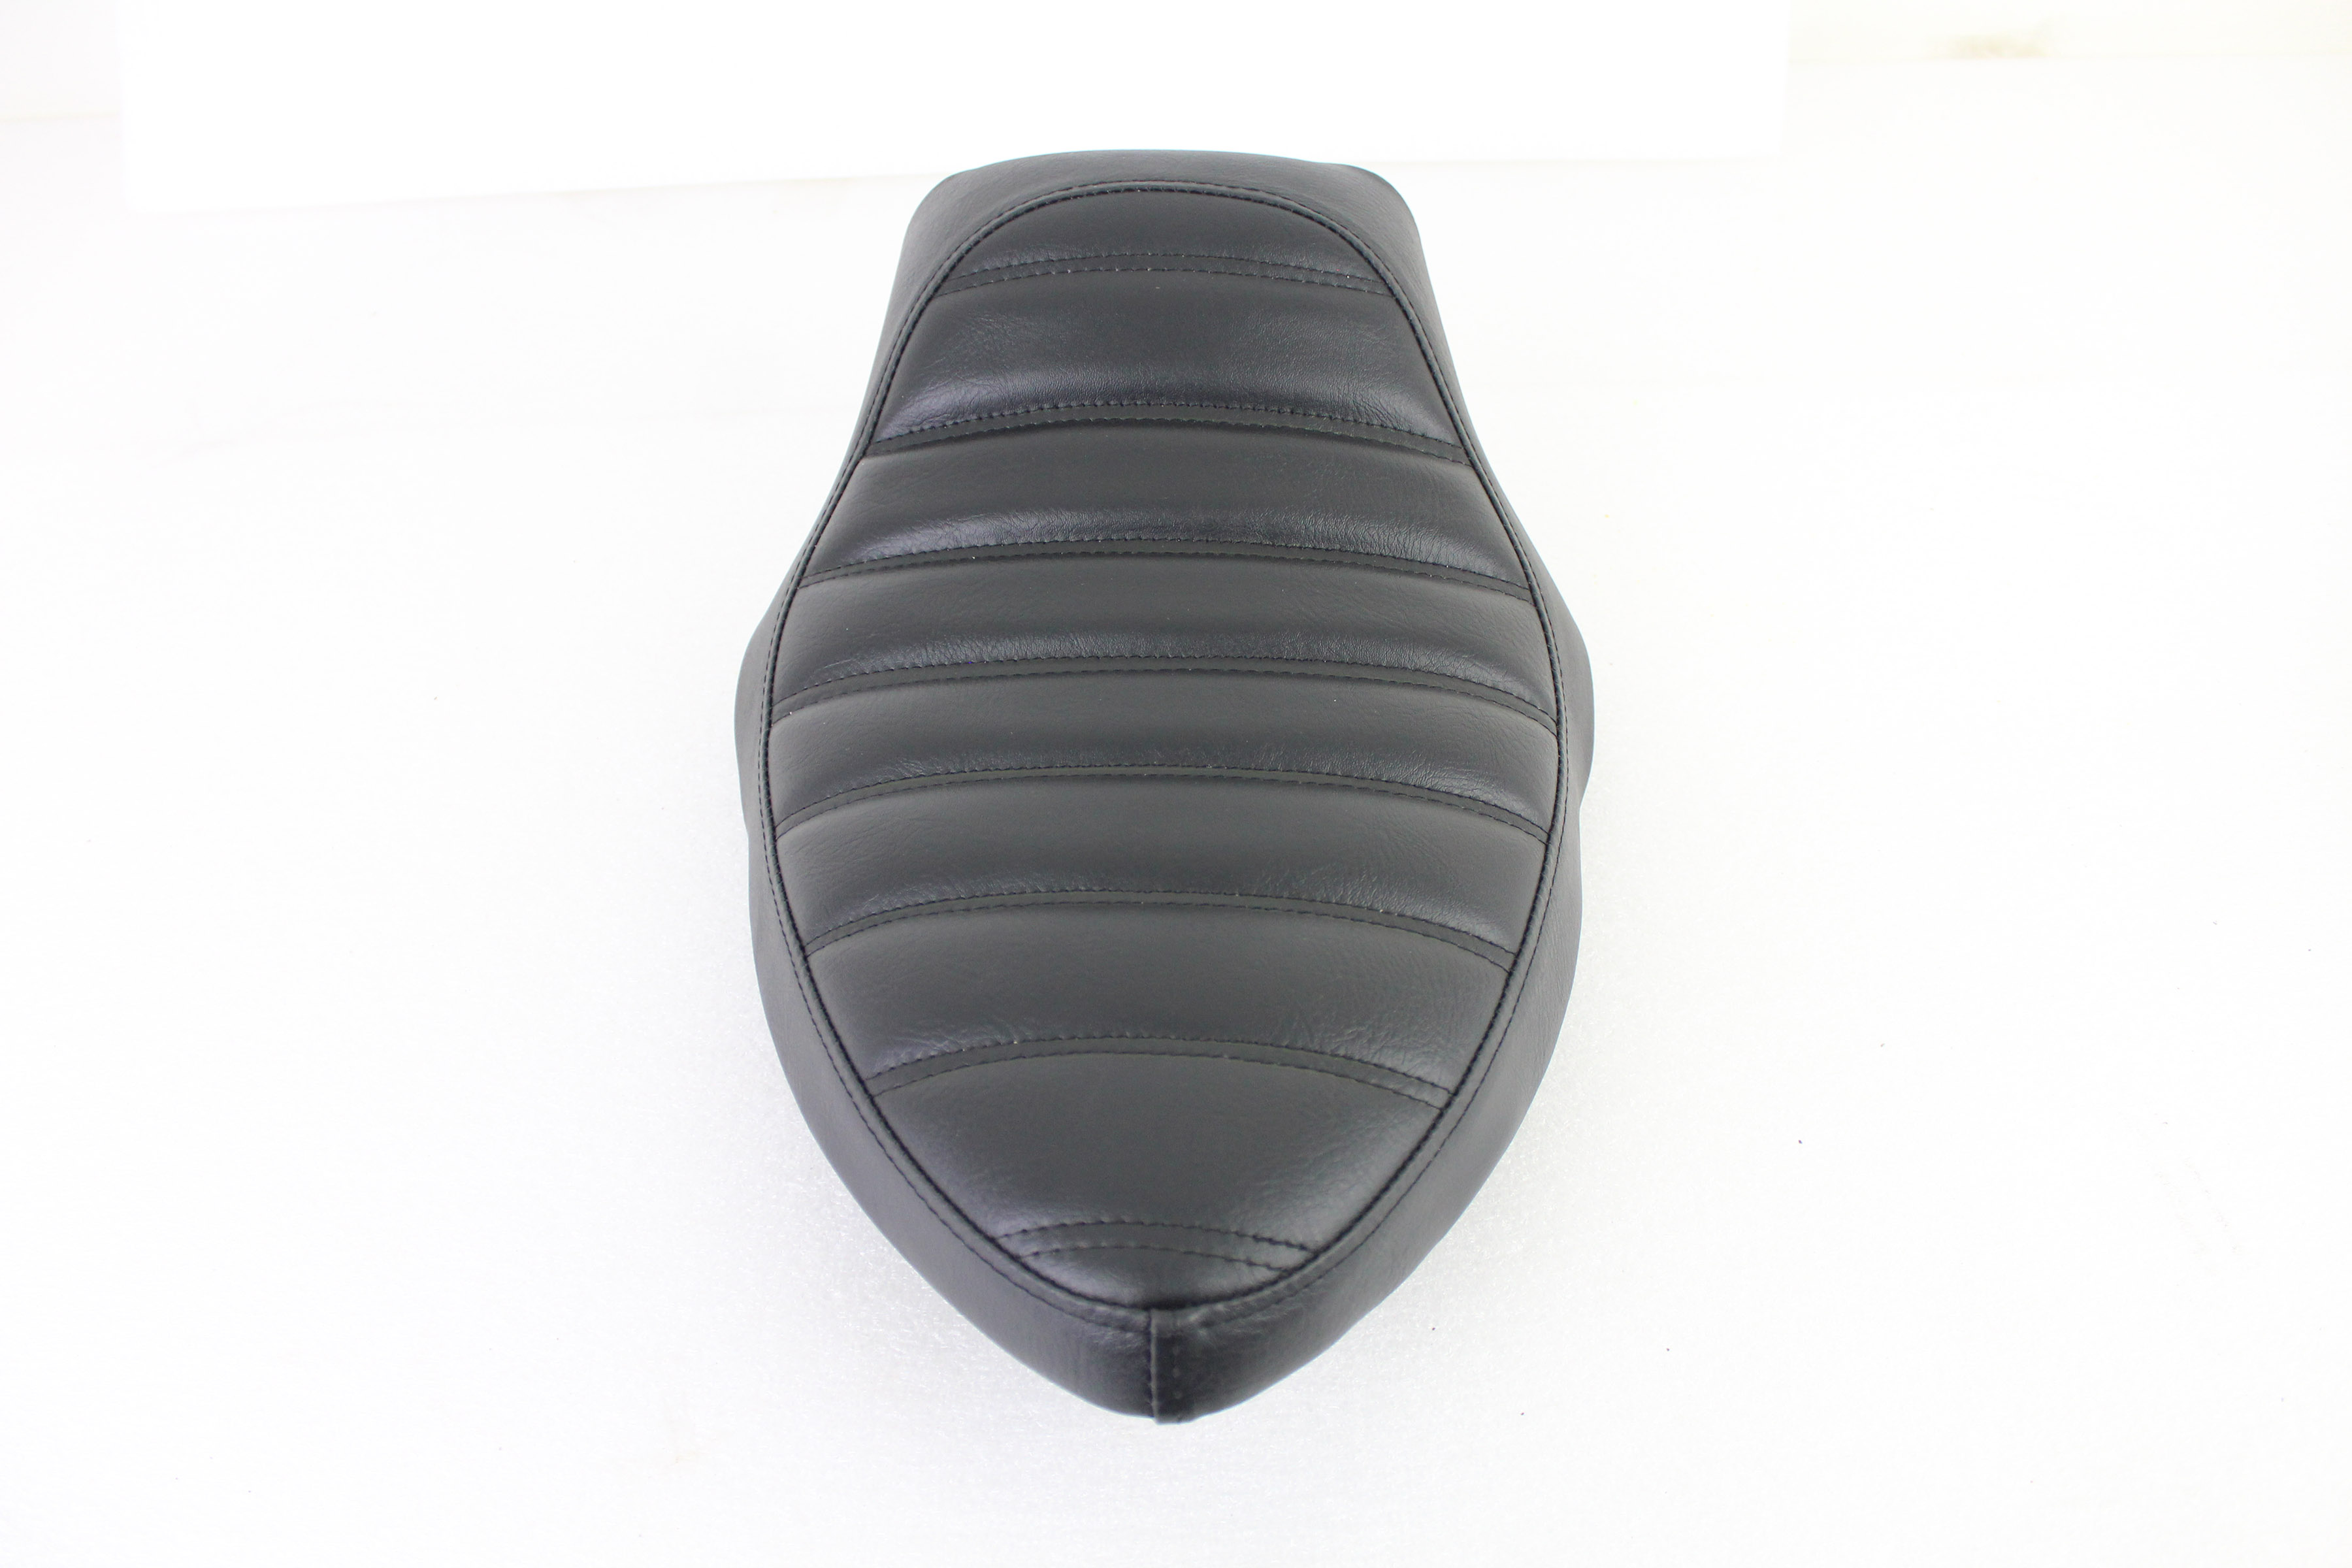 Black Vinyl Tuck and Roll Frame Mount Solo Seat